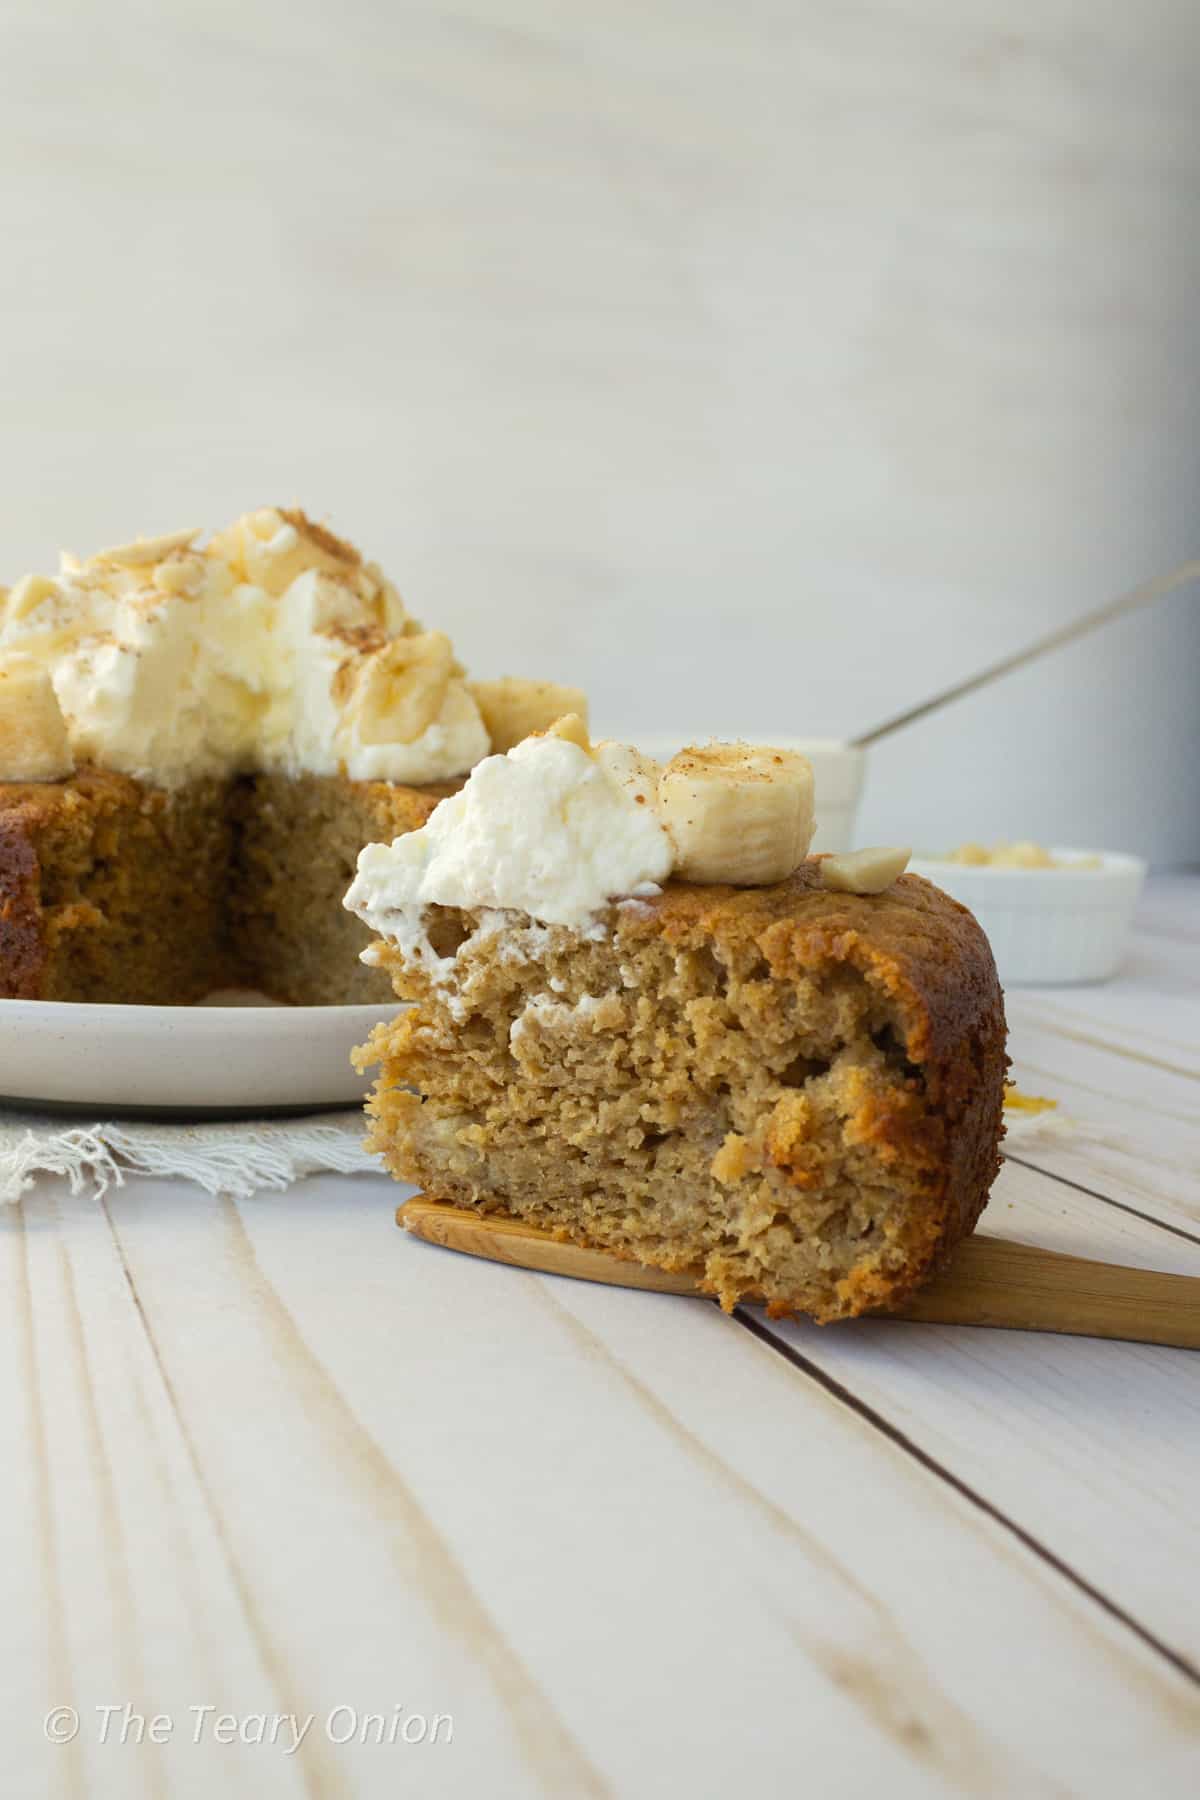 A slice of healthy banana cake with whipped cream, fresh bananas and slivered almonds on top.